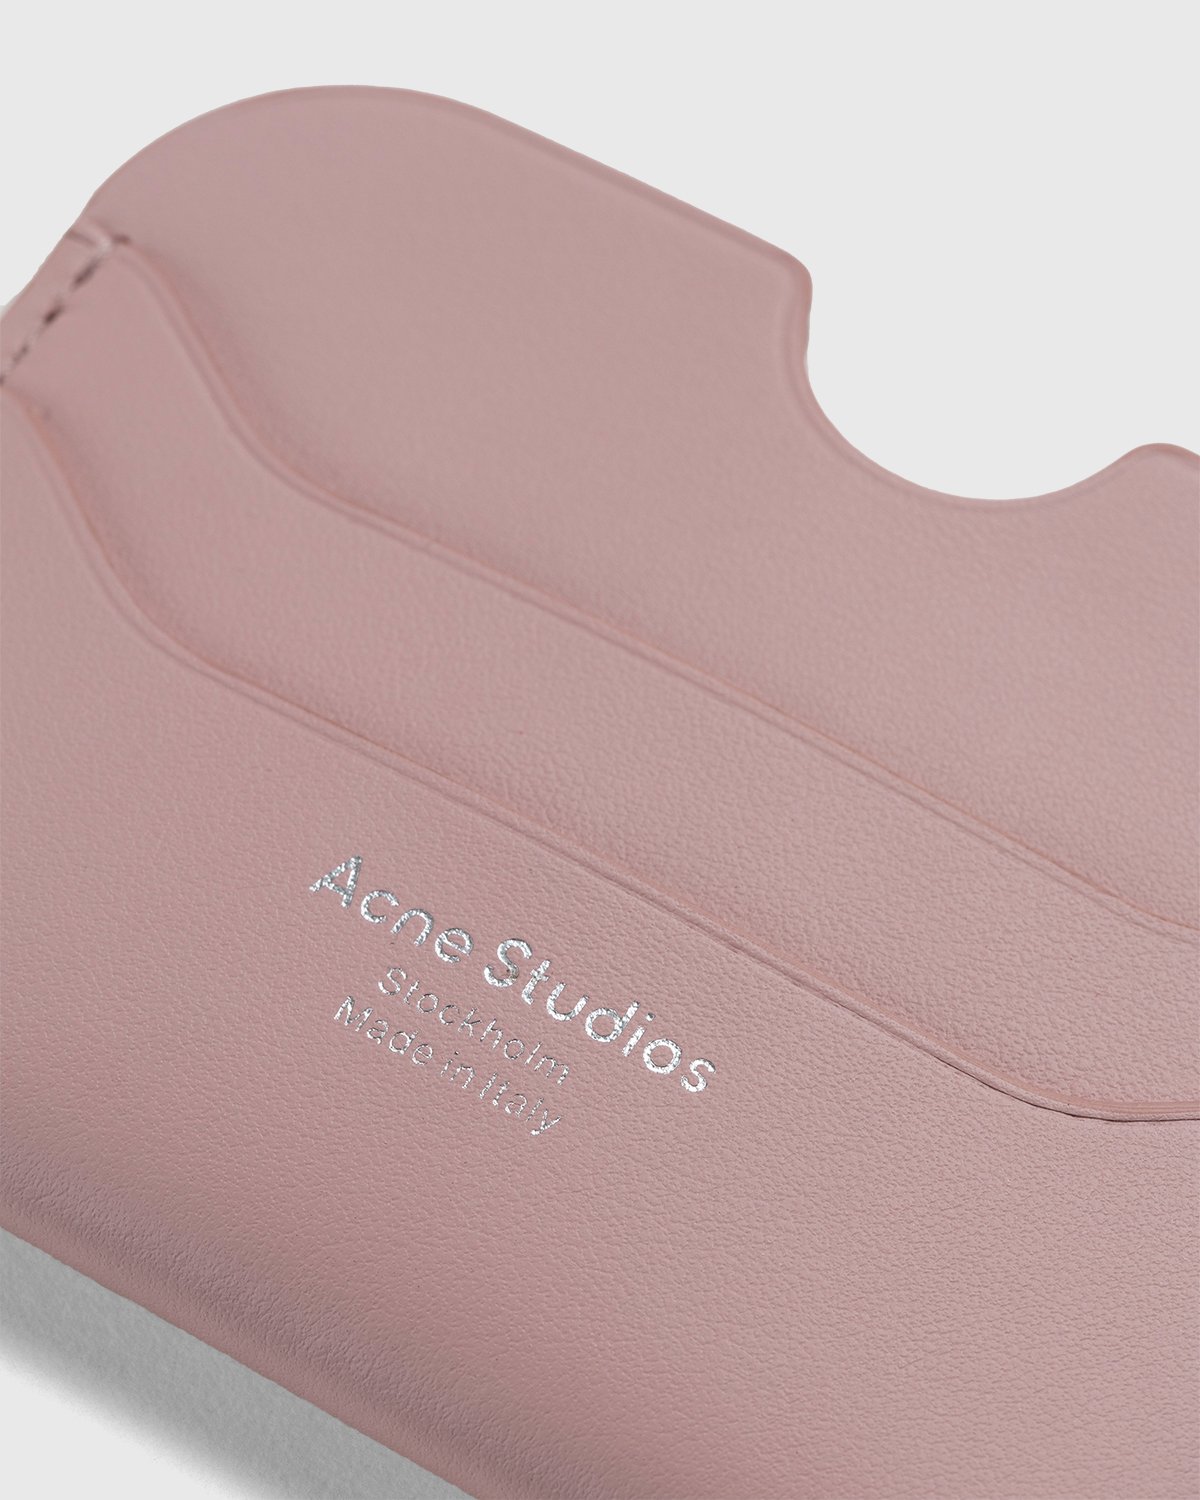 Acne Studios - Leather Card Case Powder Pink - Accessories - Pink - Image 3